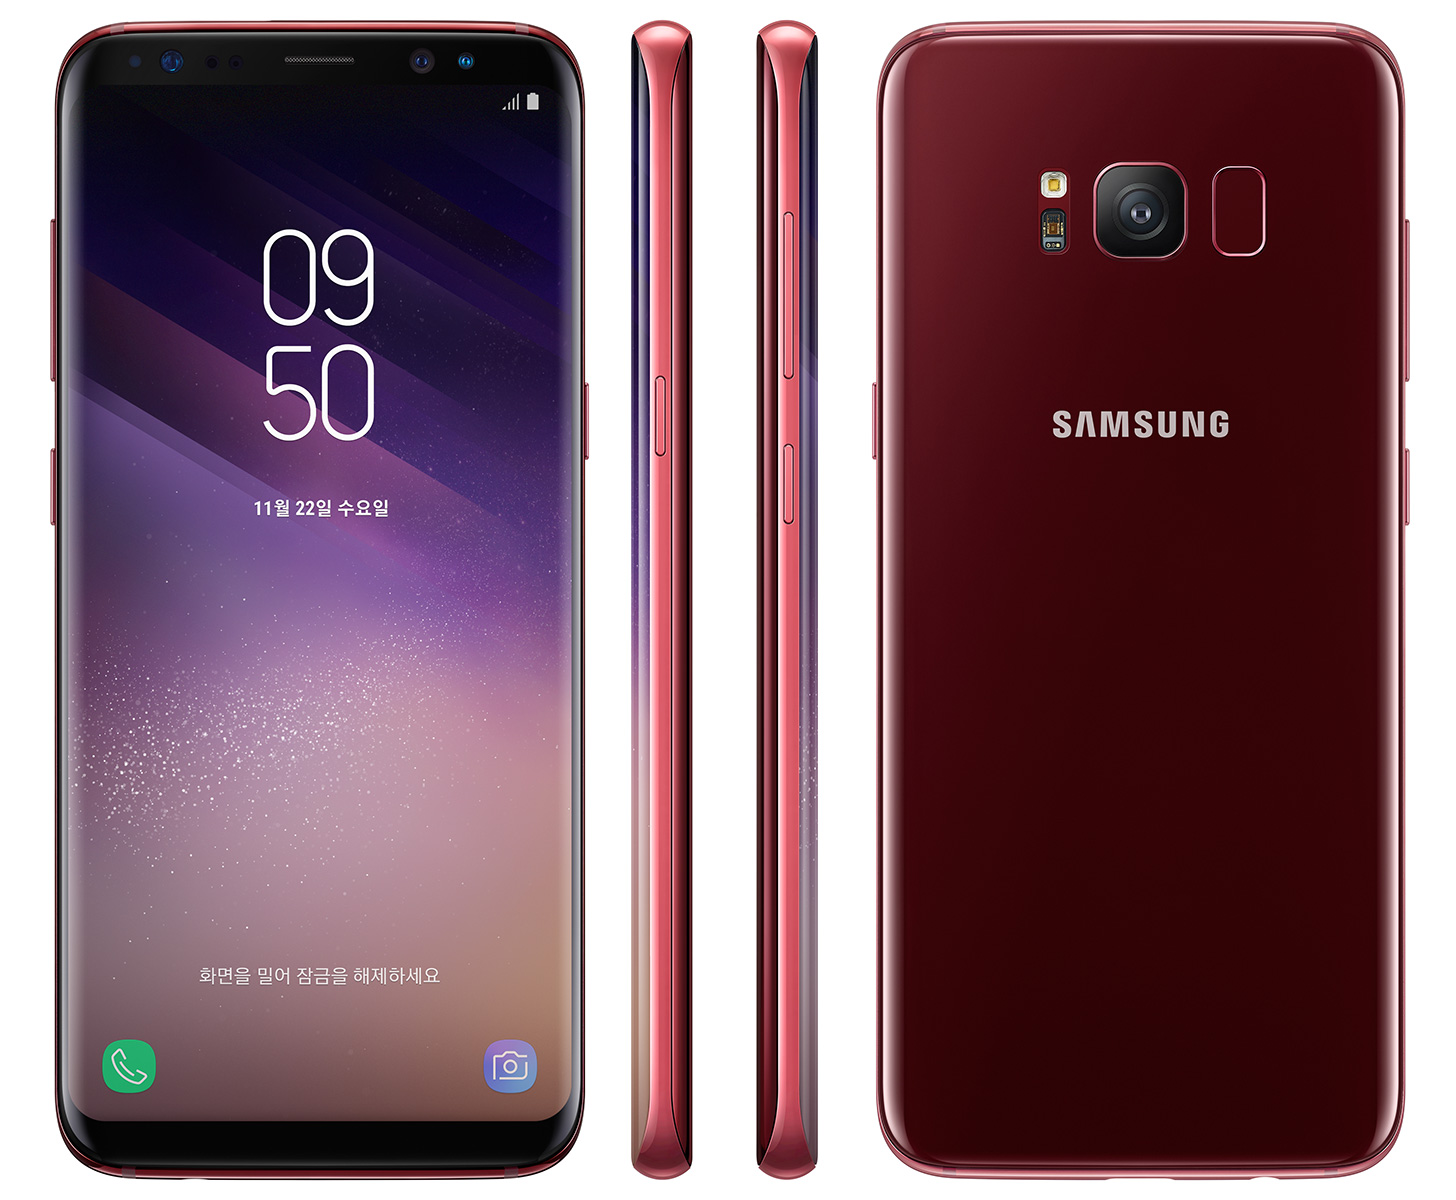 Samsung Galaxy S8 Burgundy Red officially launching today | PhoneDog